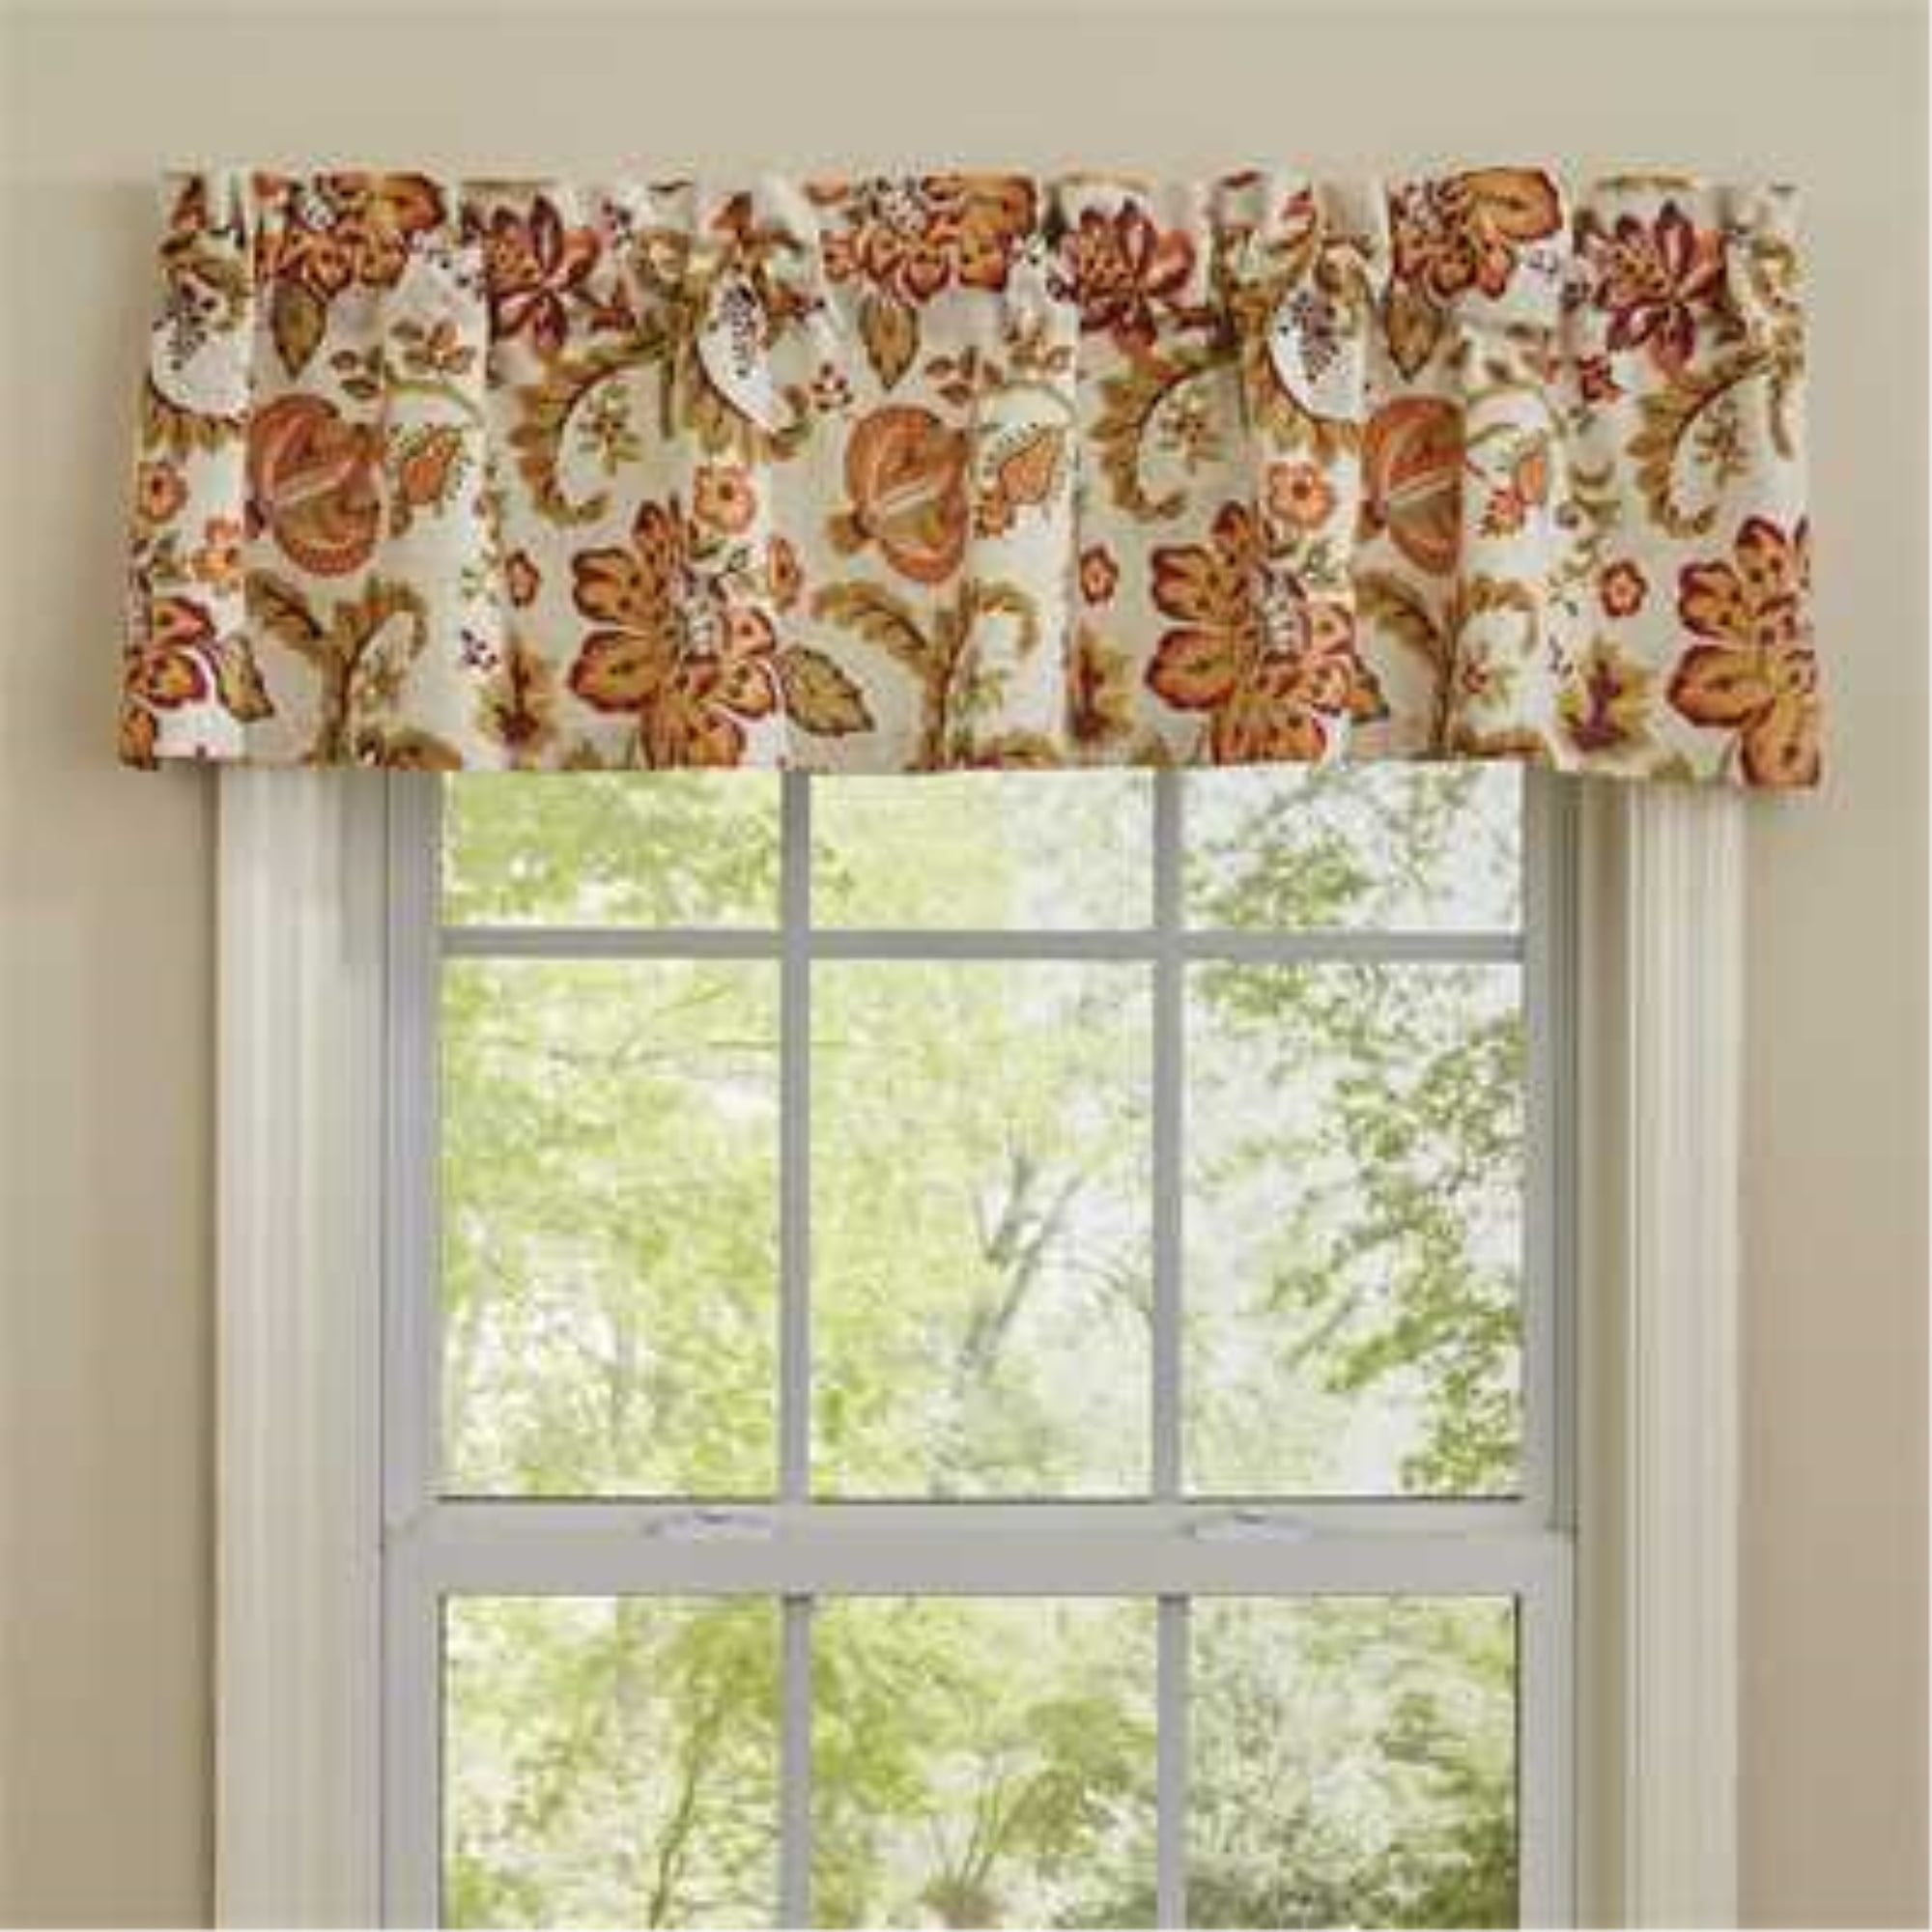 50x16" Multi Ellis Curtain Queen's Hamlet Scallop Valance With 3" Rod Pocket 